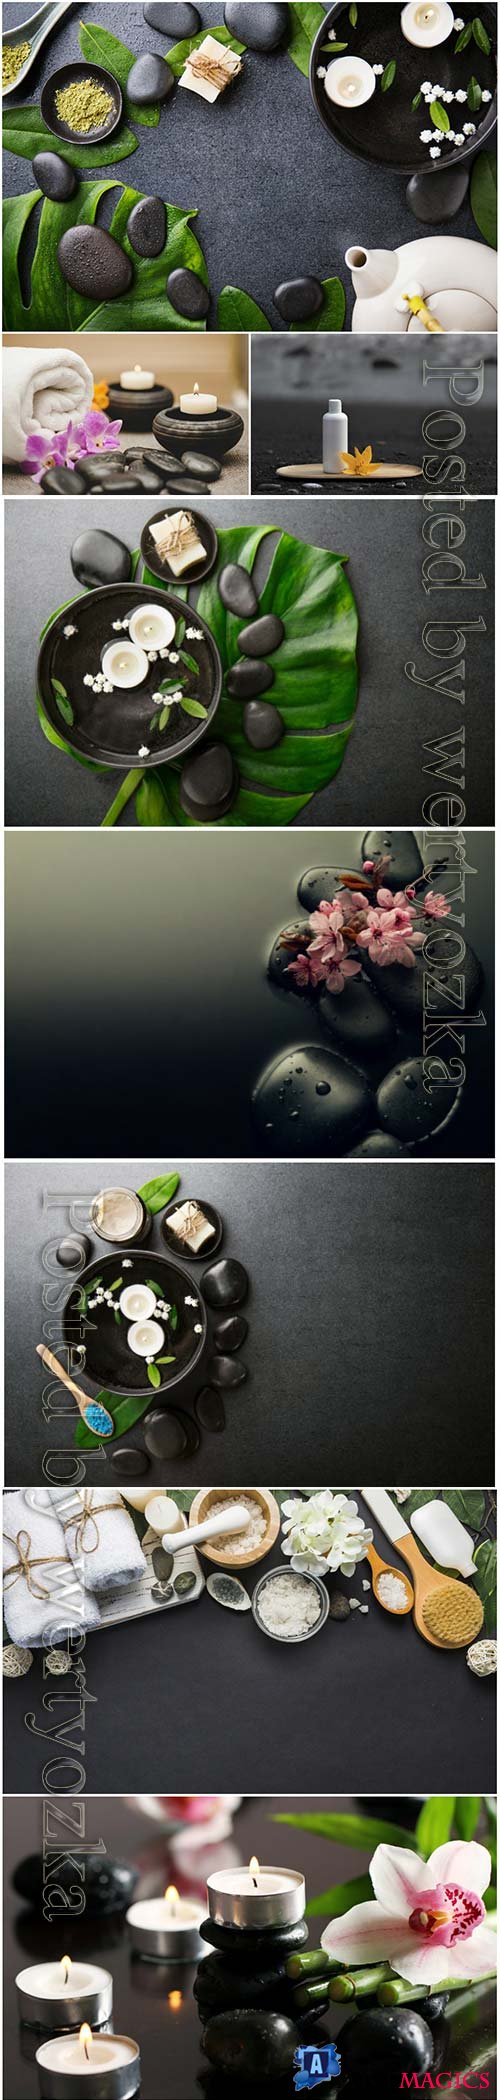 Spa backgrounds with orchids and spa stones